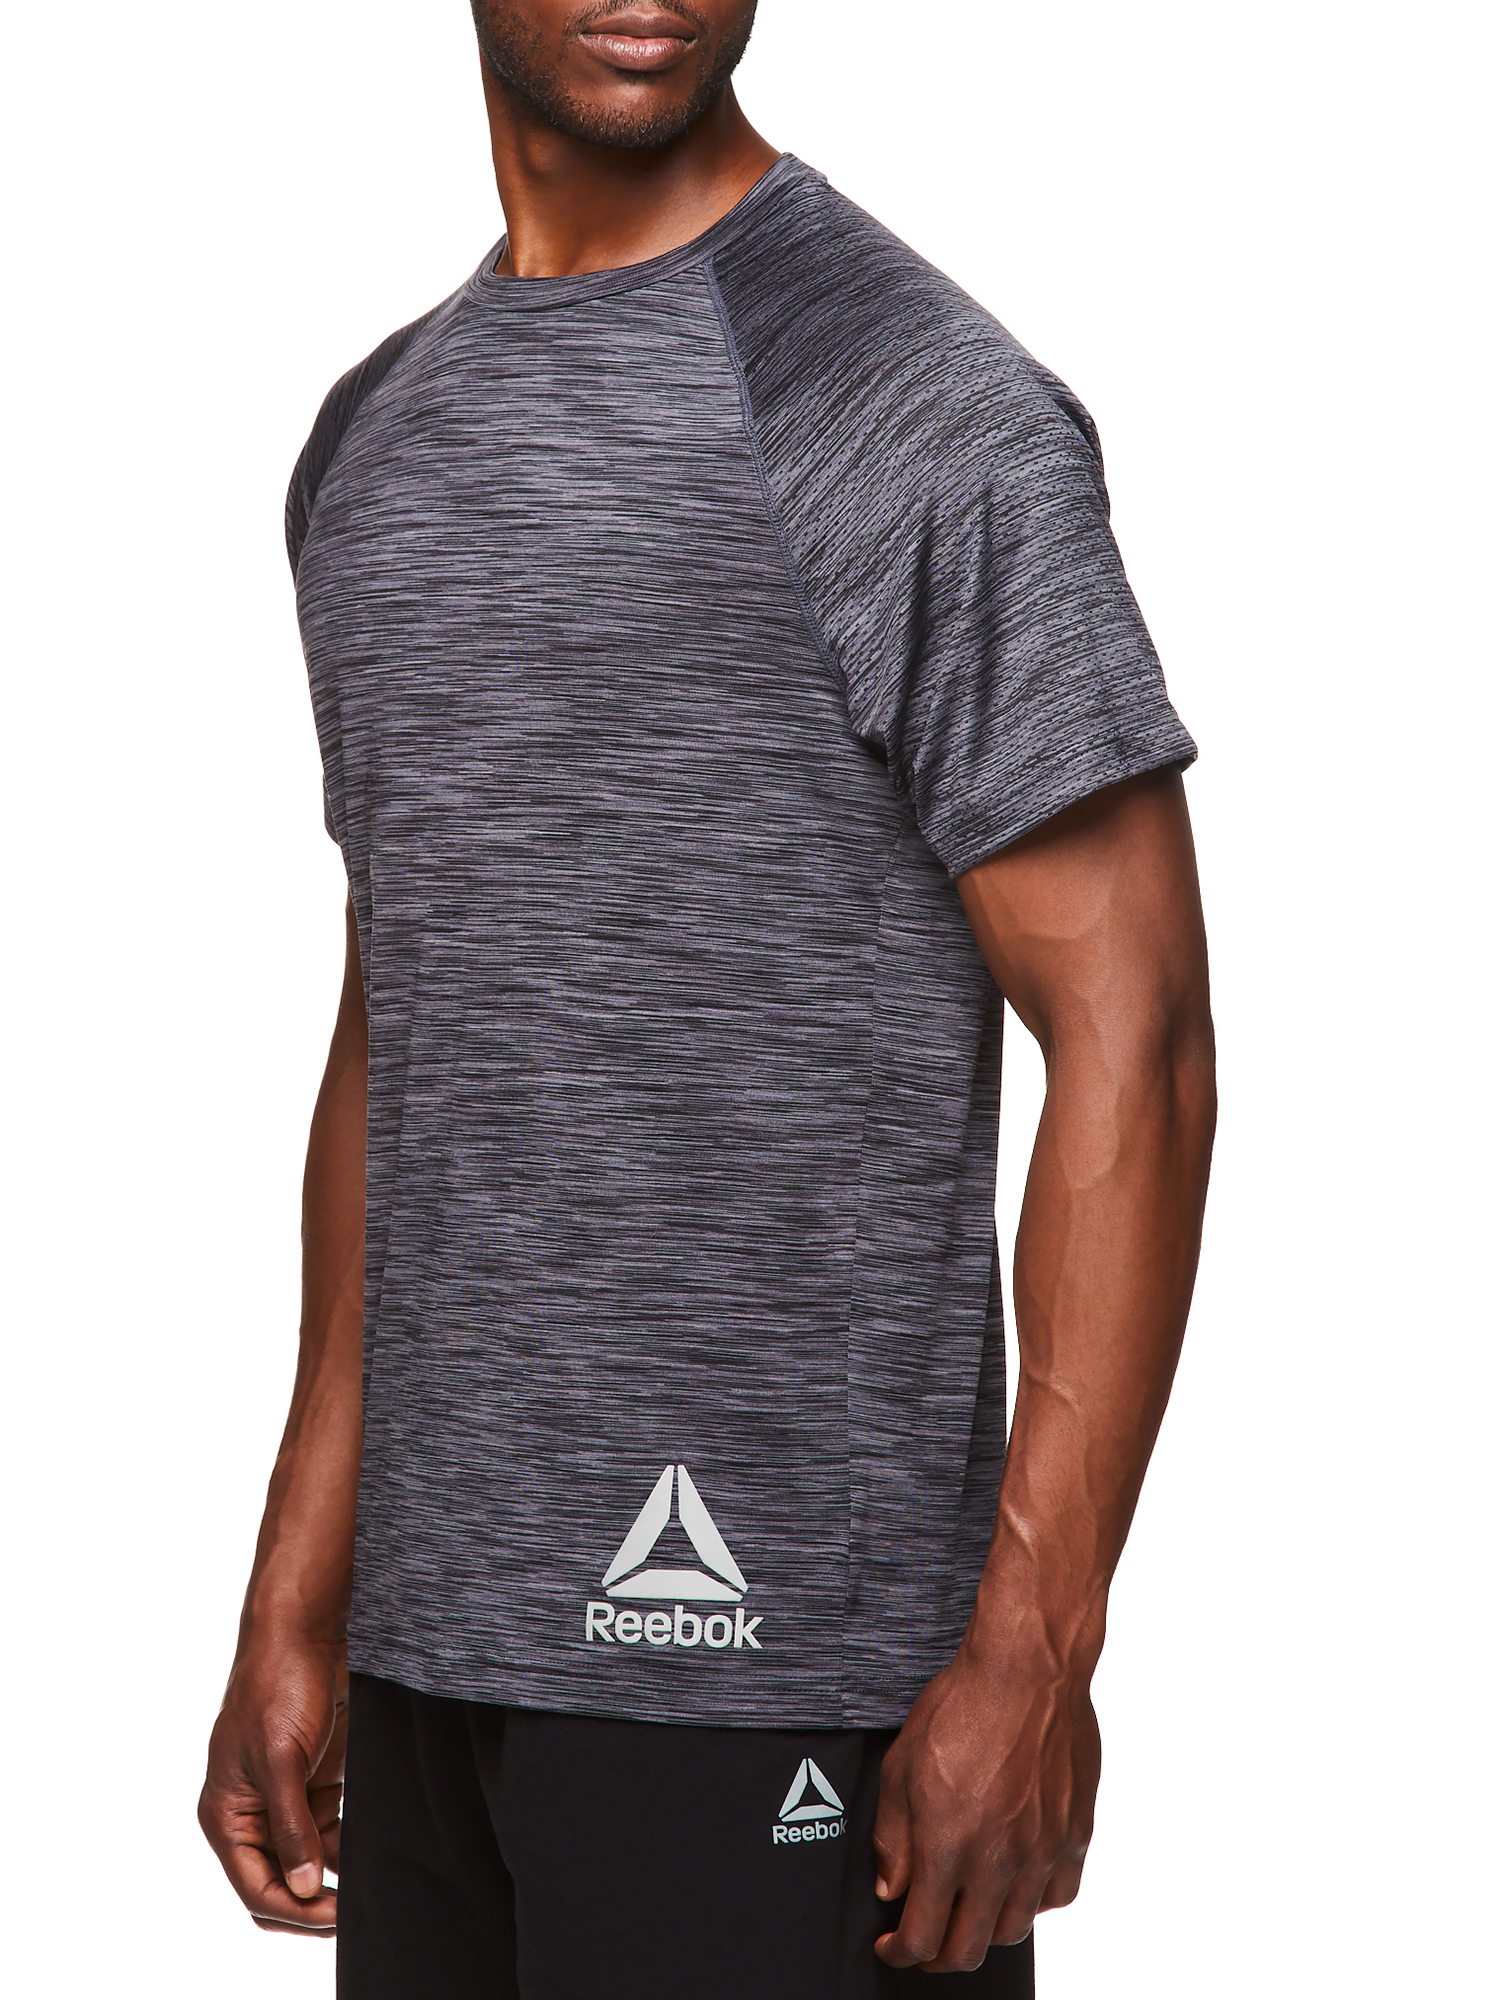 Reebok Men's and Big Men's Active Short Sleeve Tee with Mesh Sleeves, up to Size 3XL - image 2 of 4